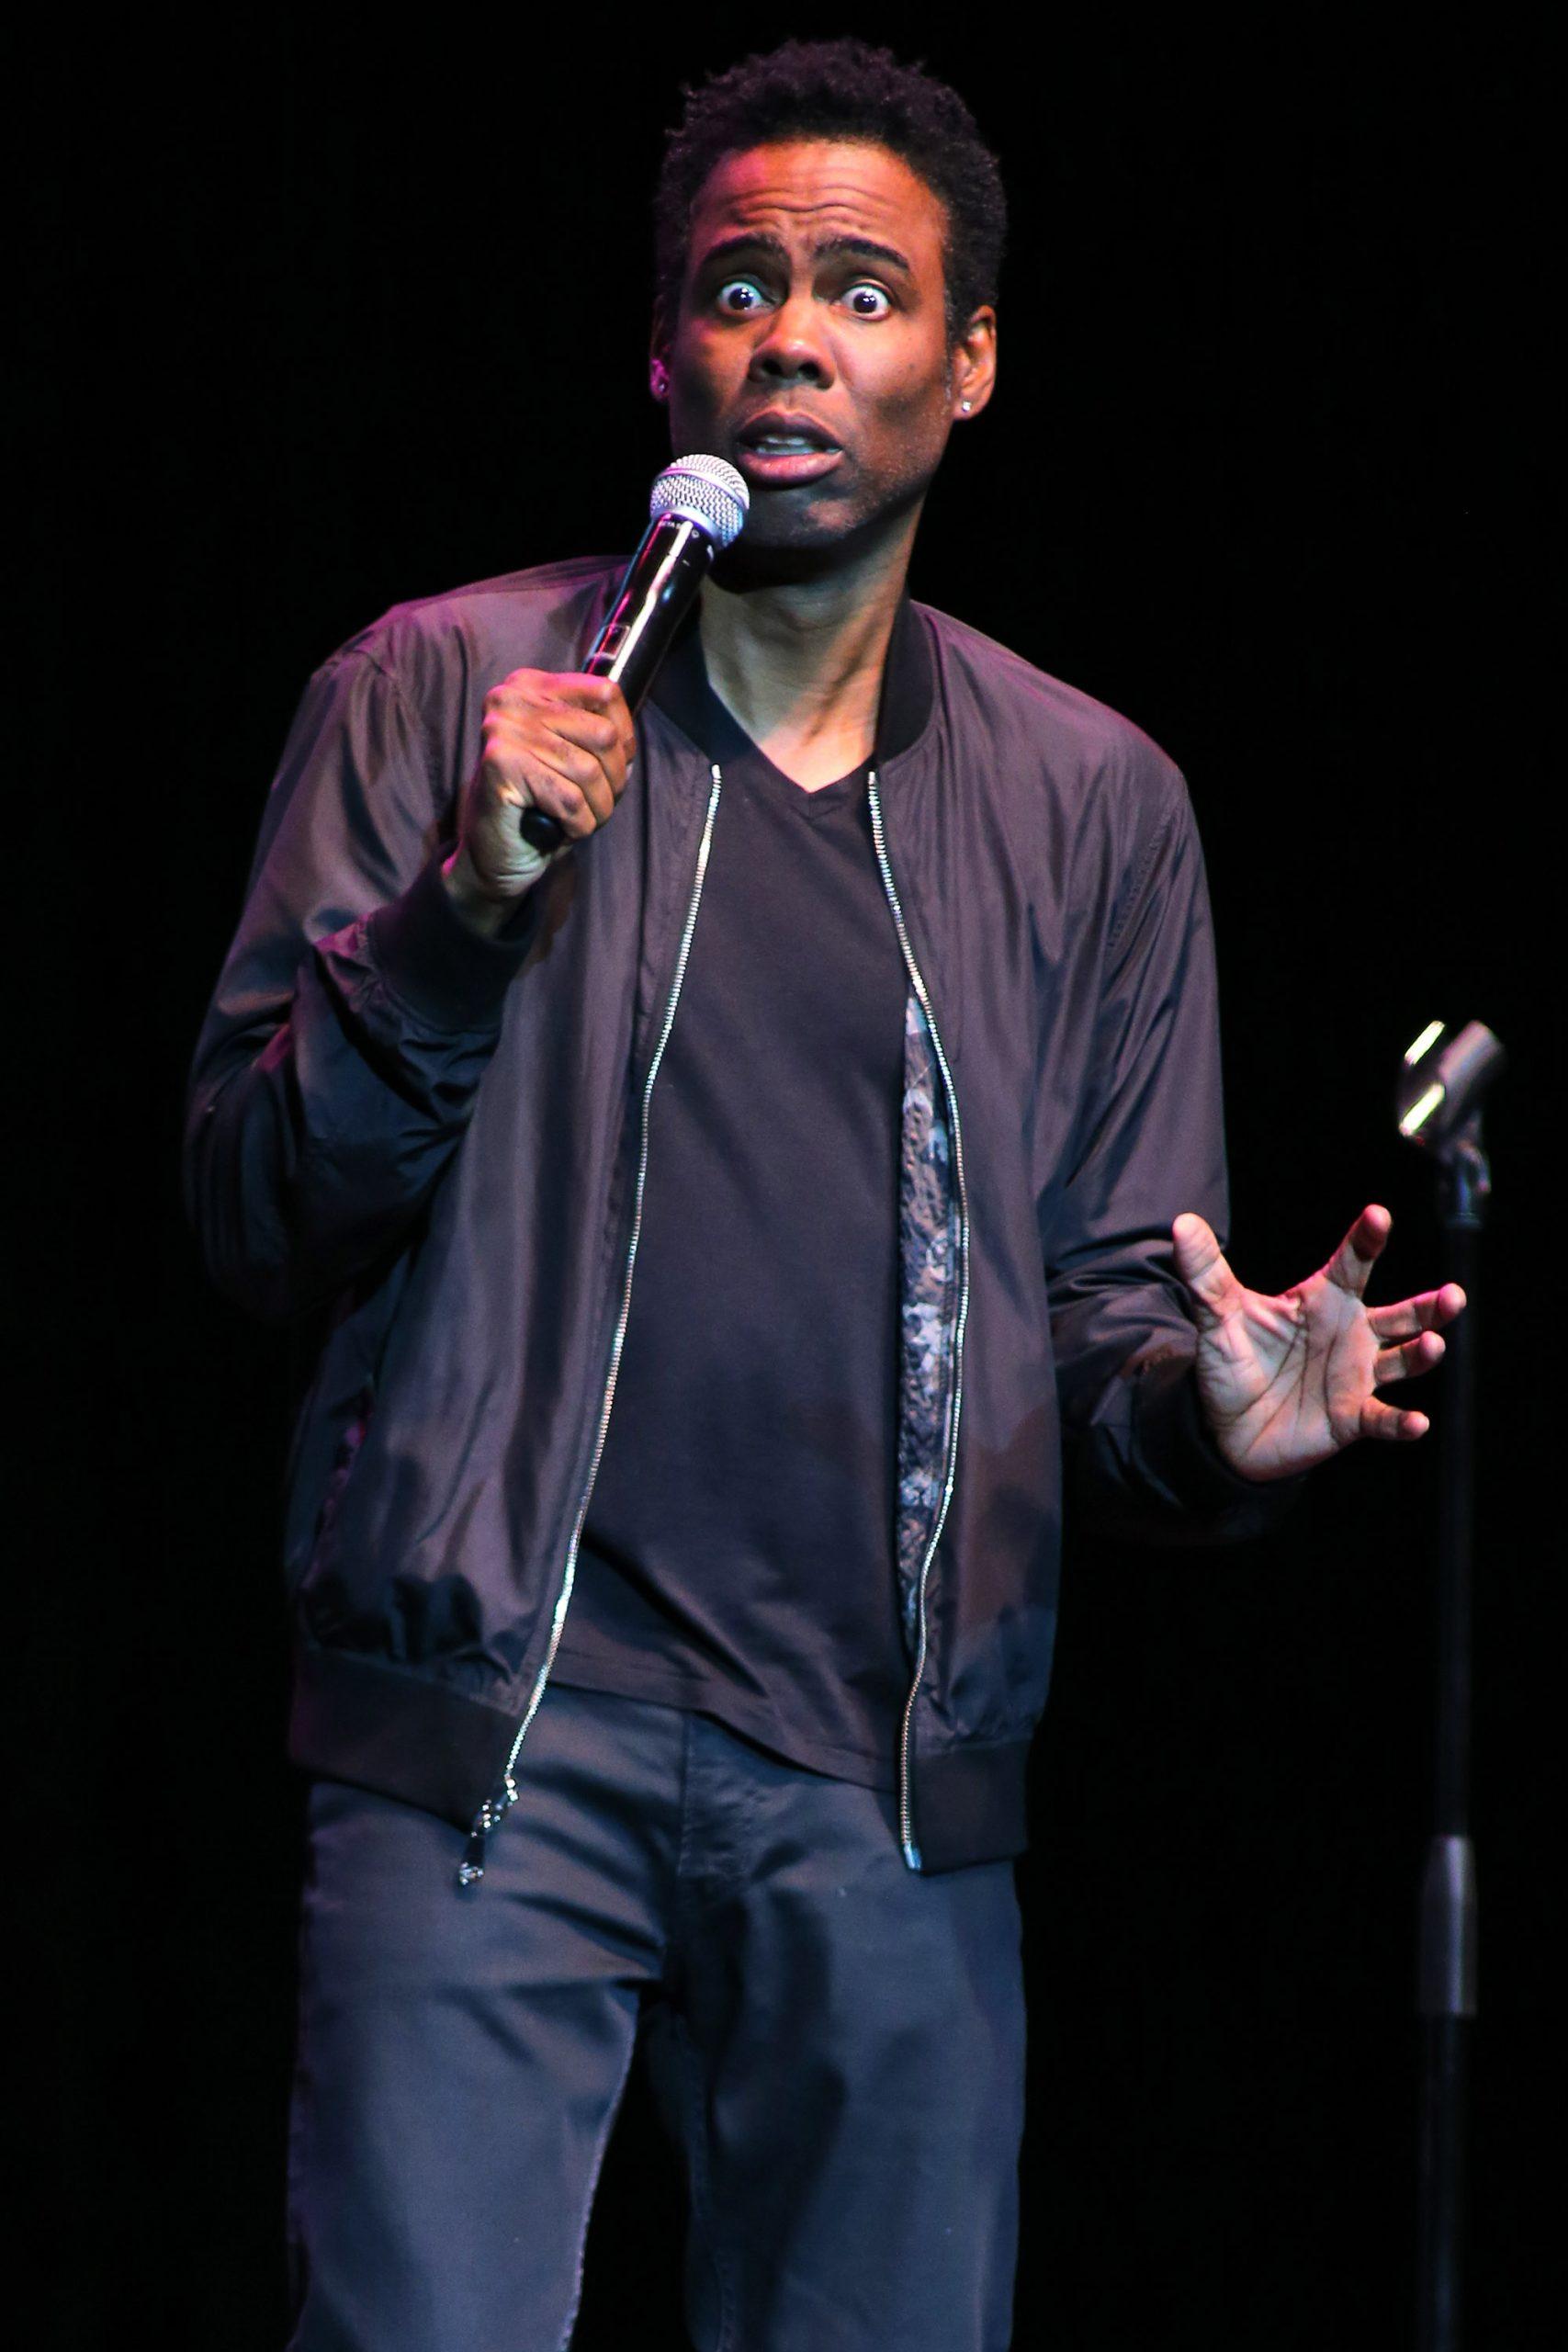 Chris Rock performs at Hard Rock Live at the Seminole Hard Rock Hotel and Casino in Hollywood FL